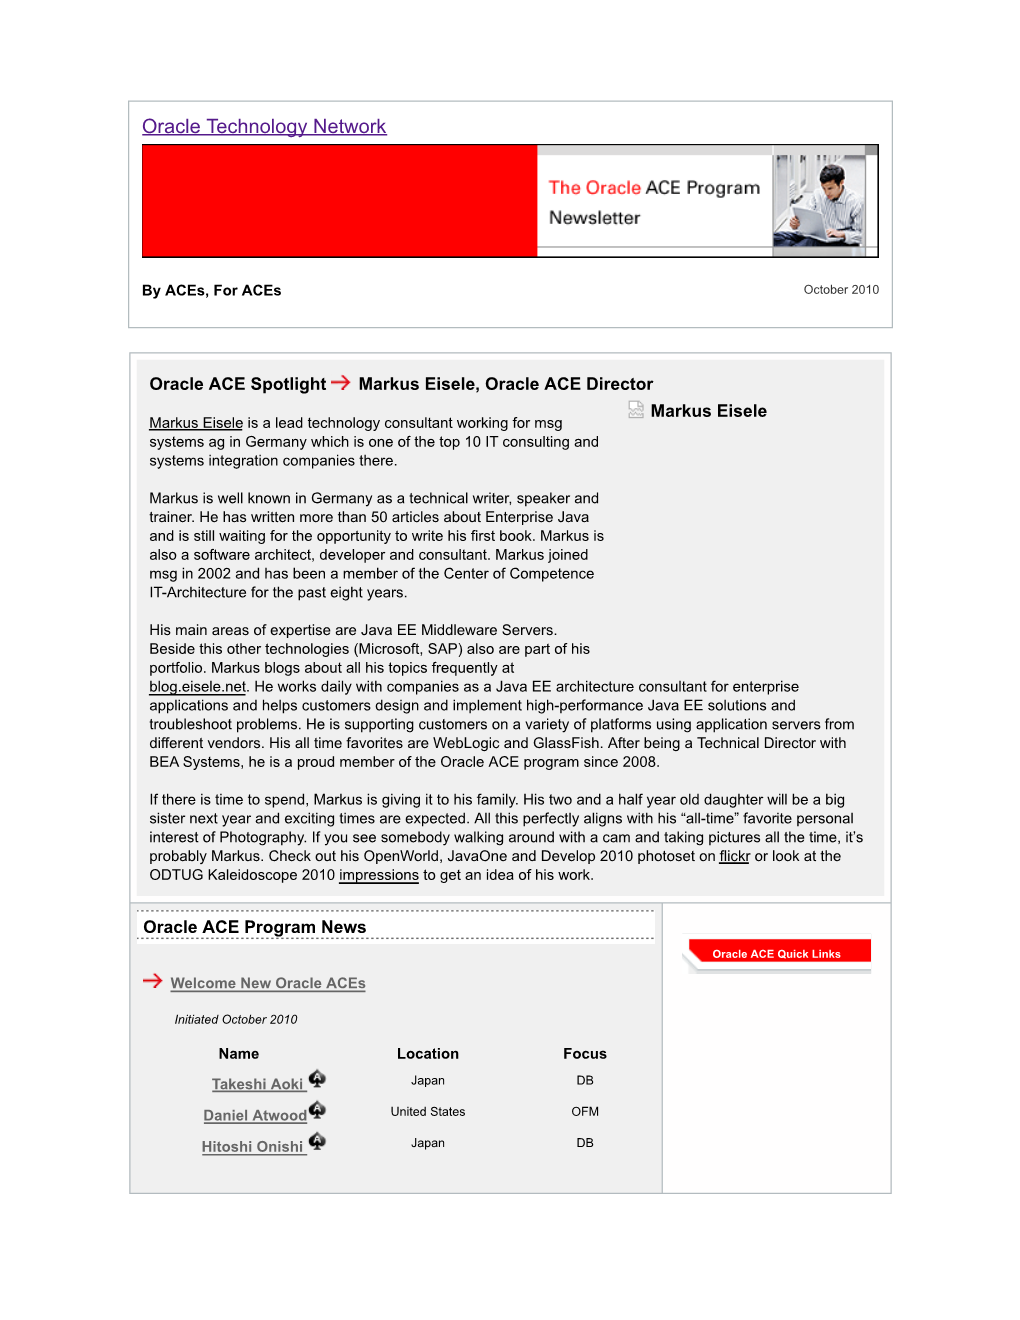 Oracle ACE Program Newsletter: by Aces, for Aces